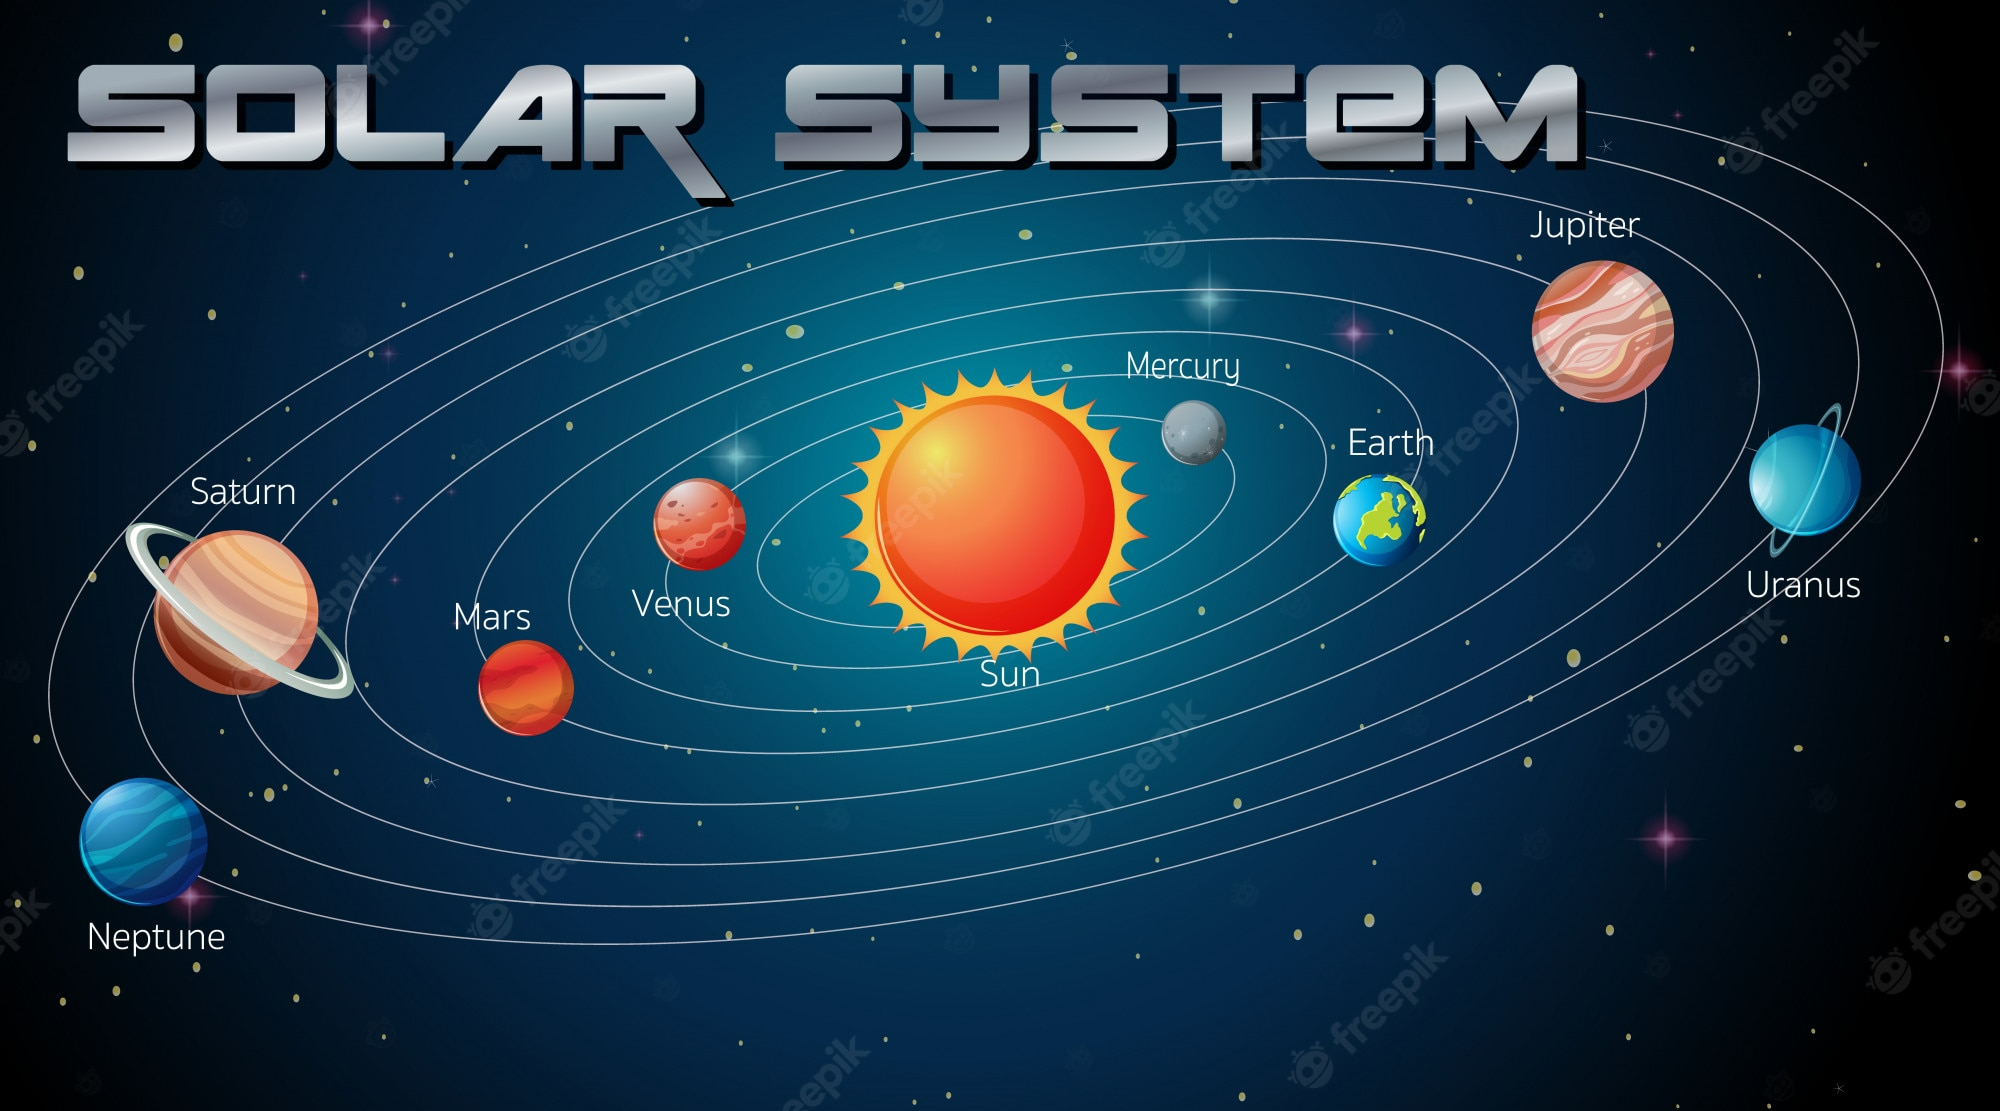 Objects in our Solar System